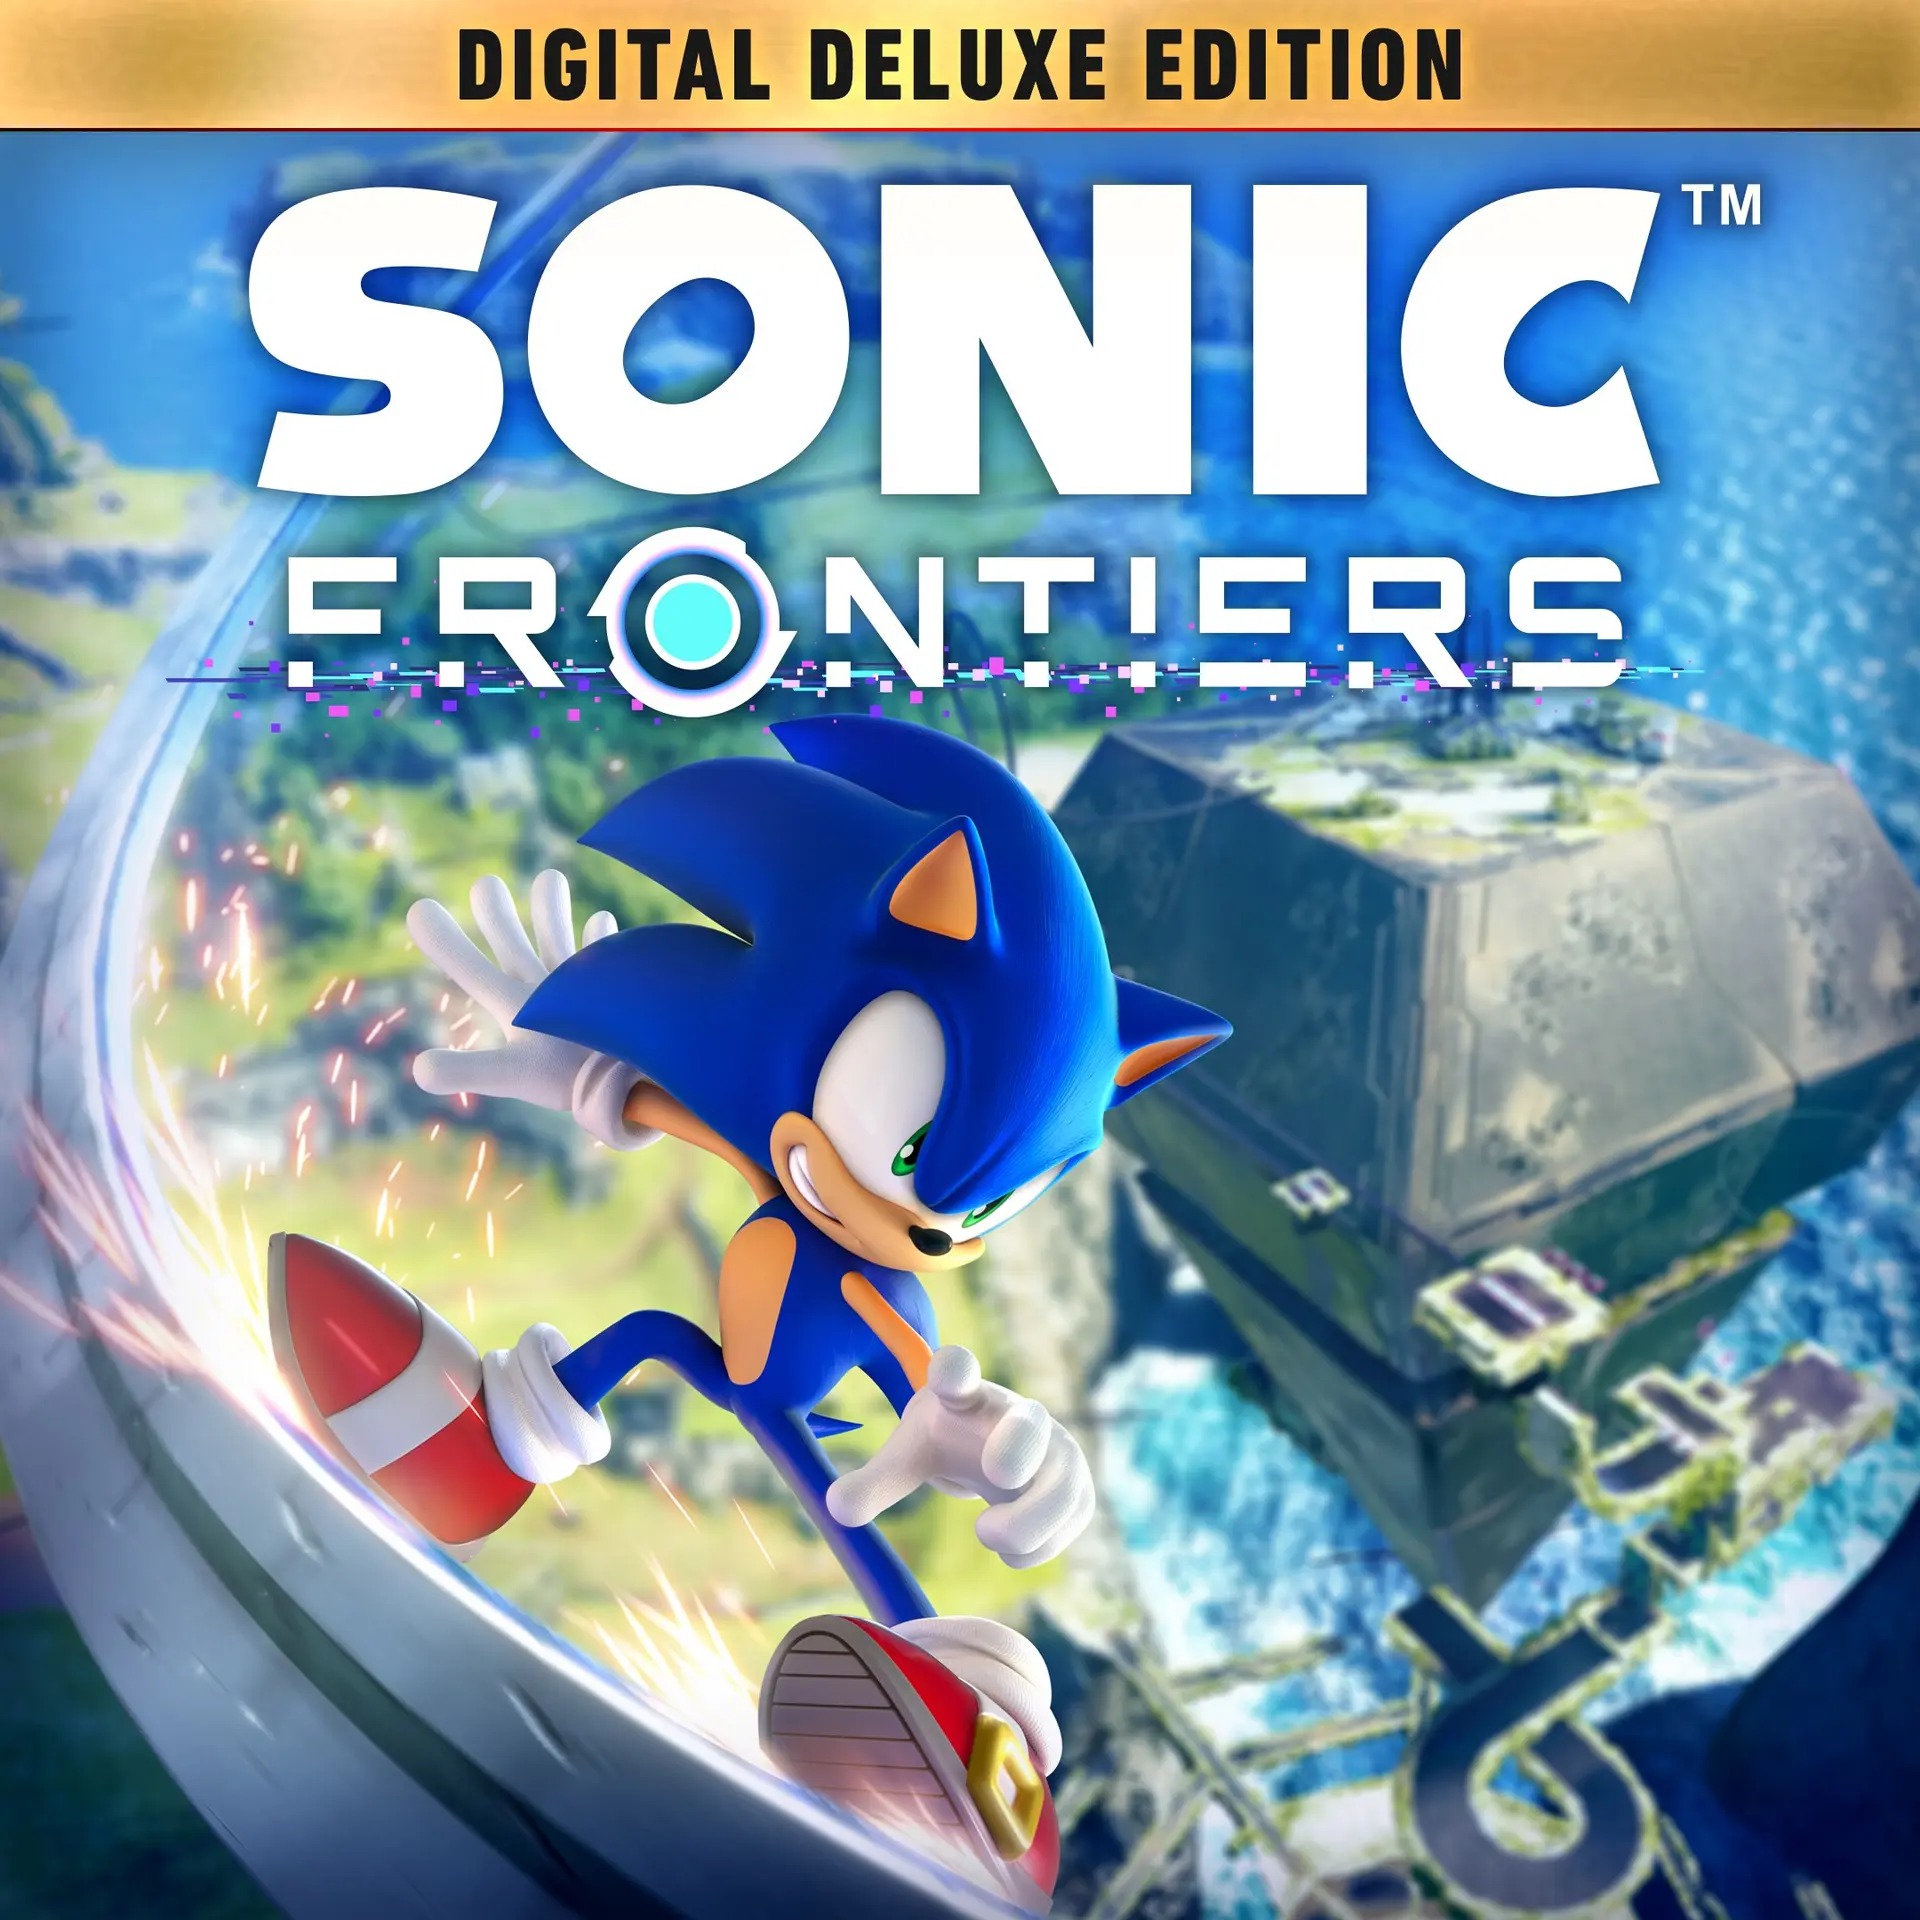 Sonic Frontiers Digital Deluxe Edition (XBOX One - Cheapest Store)